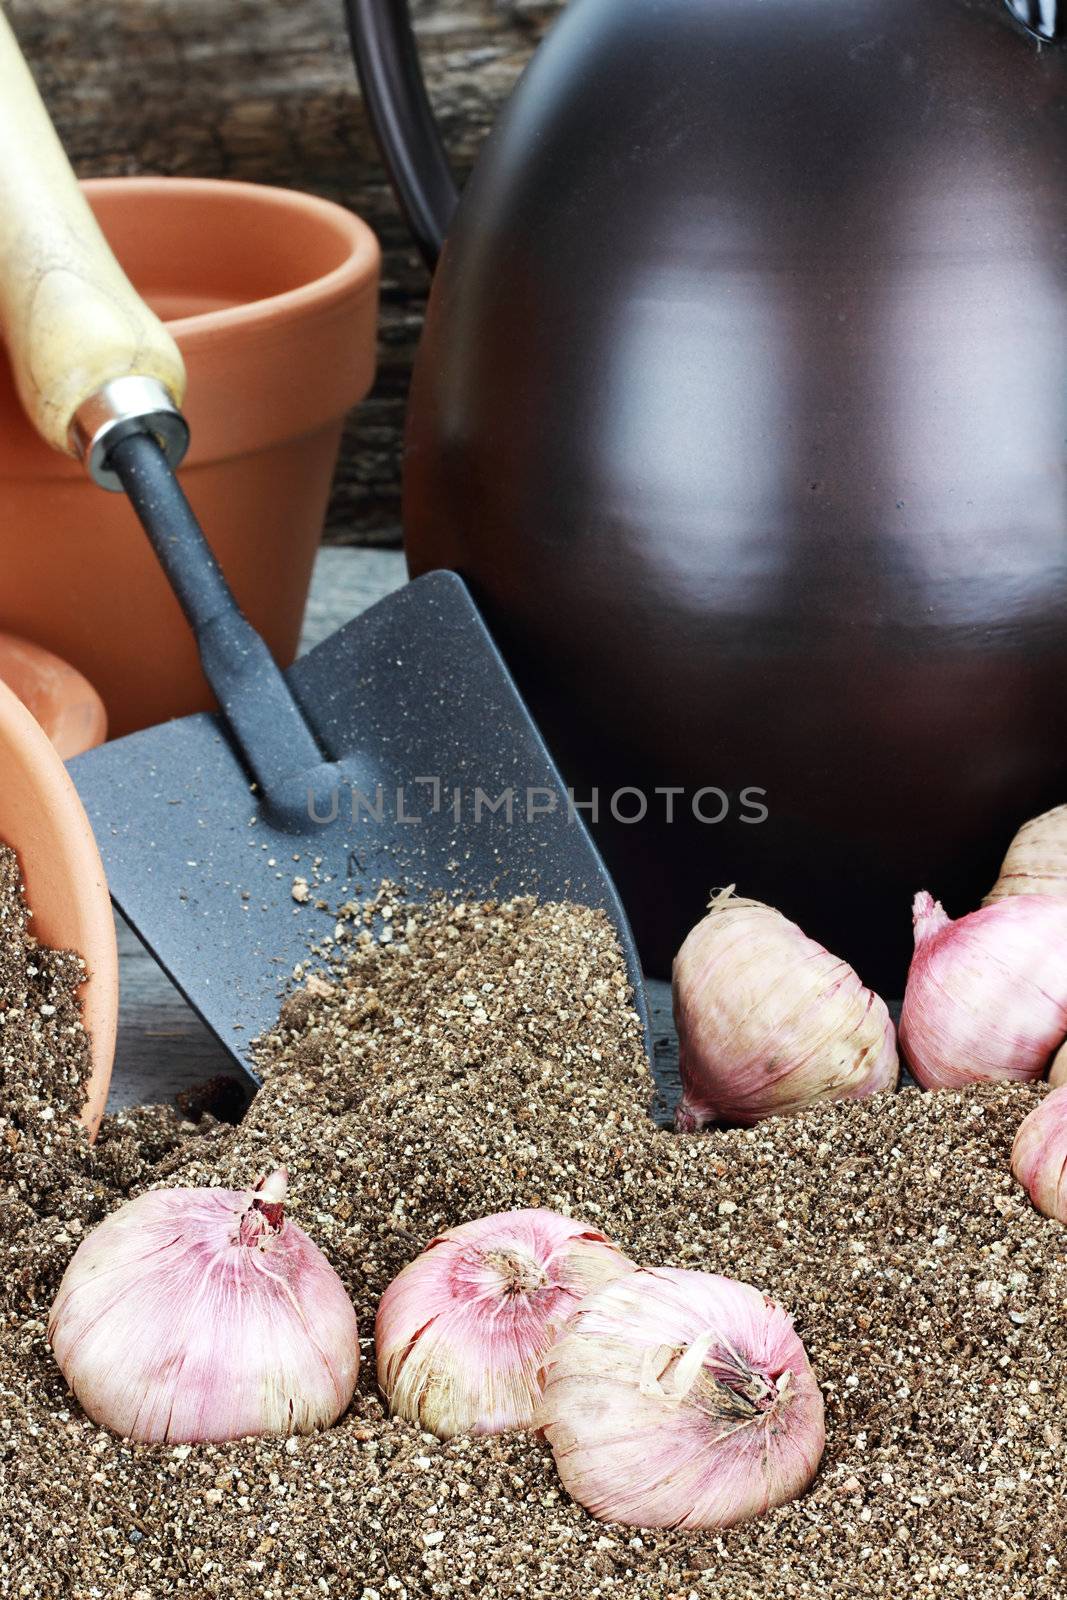 Flower corms or bulbs in potting soil with wateringcans, flower pots, and trowel. 